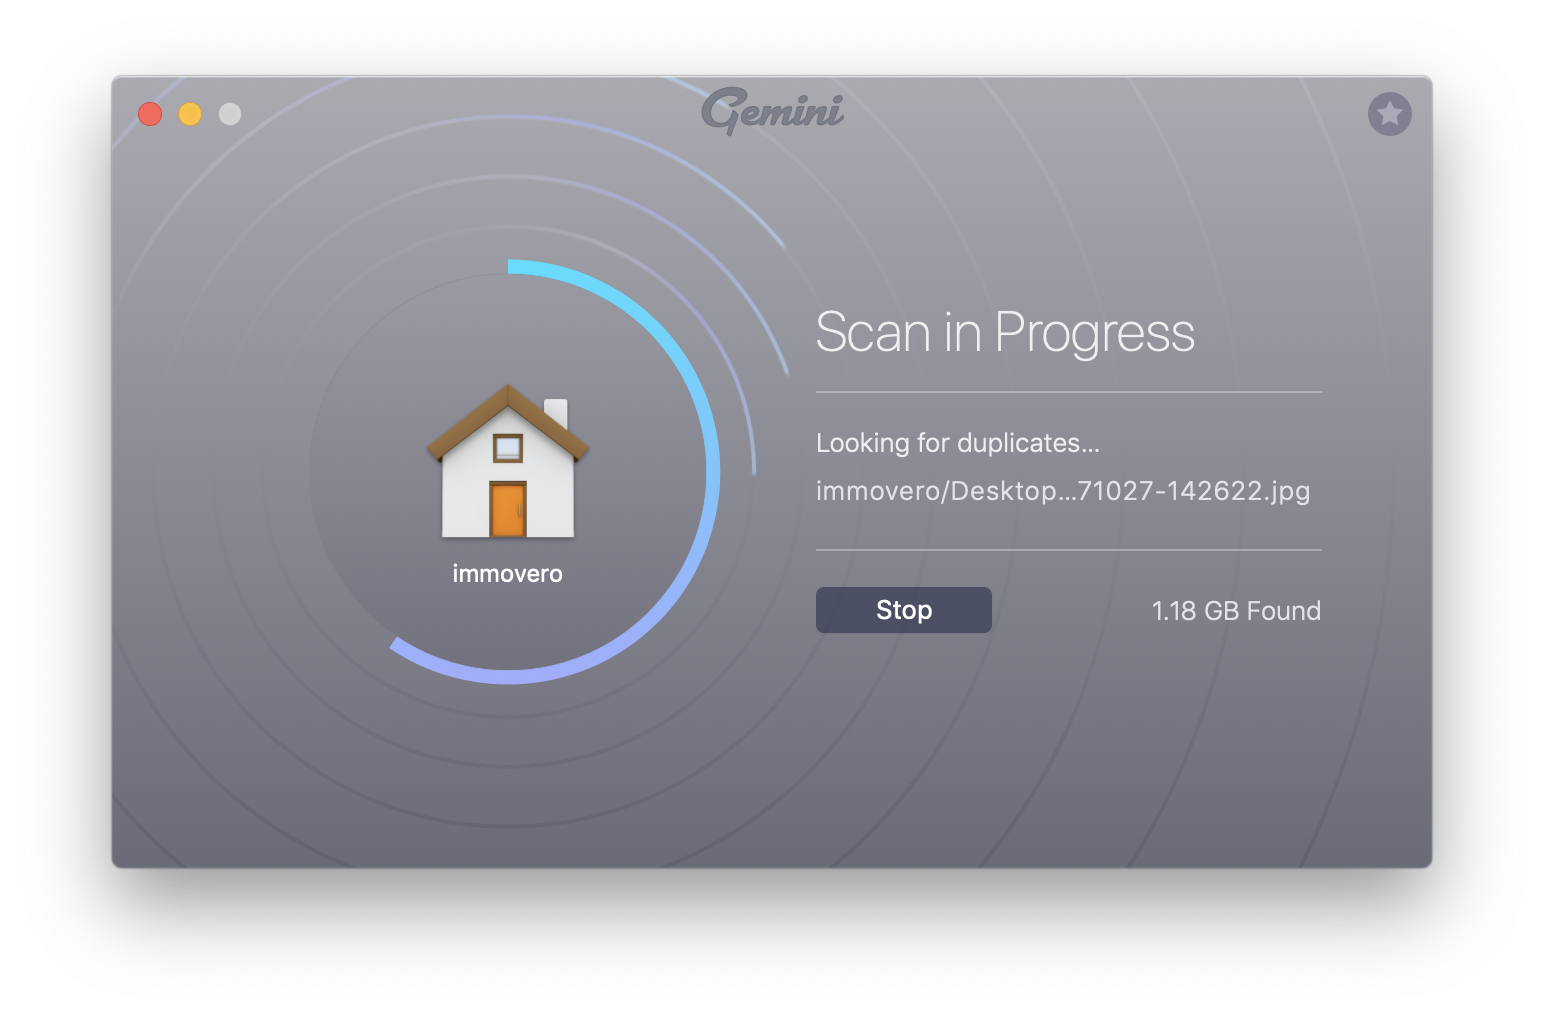 Scan your Mac to find duplicates with Gemini